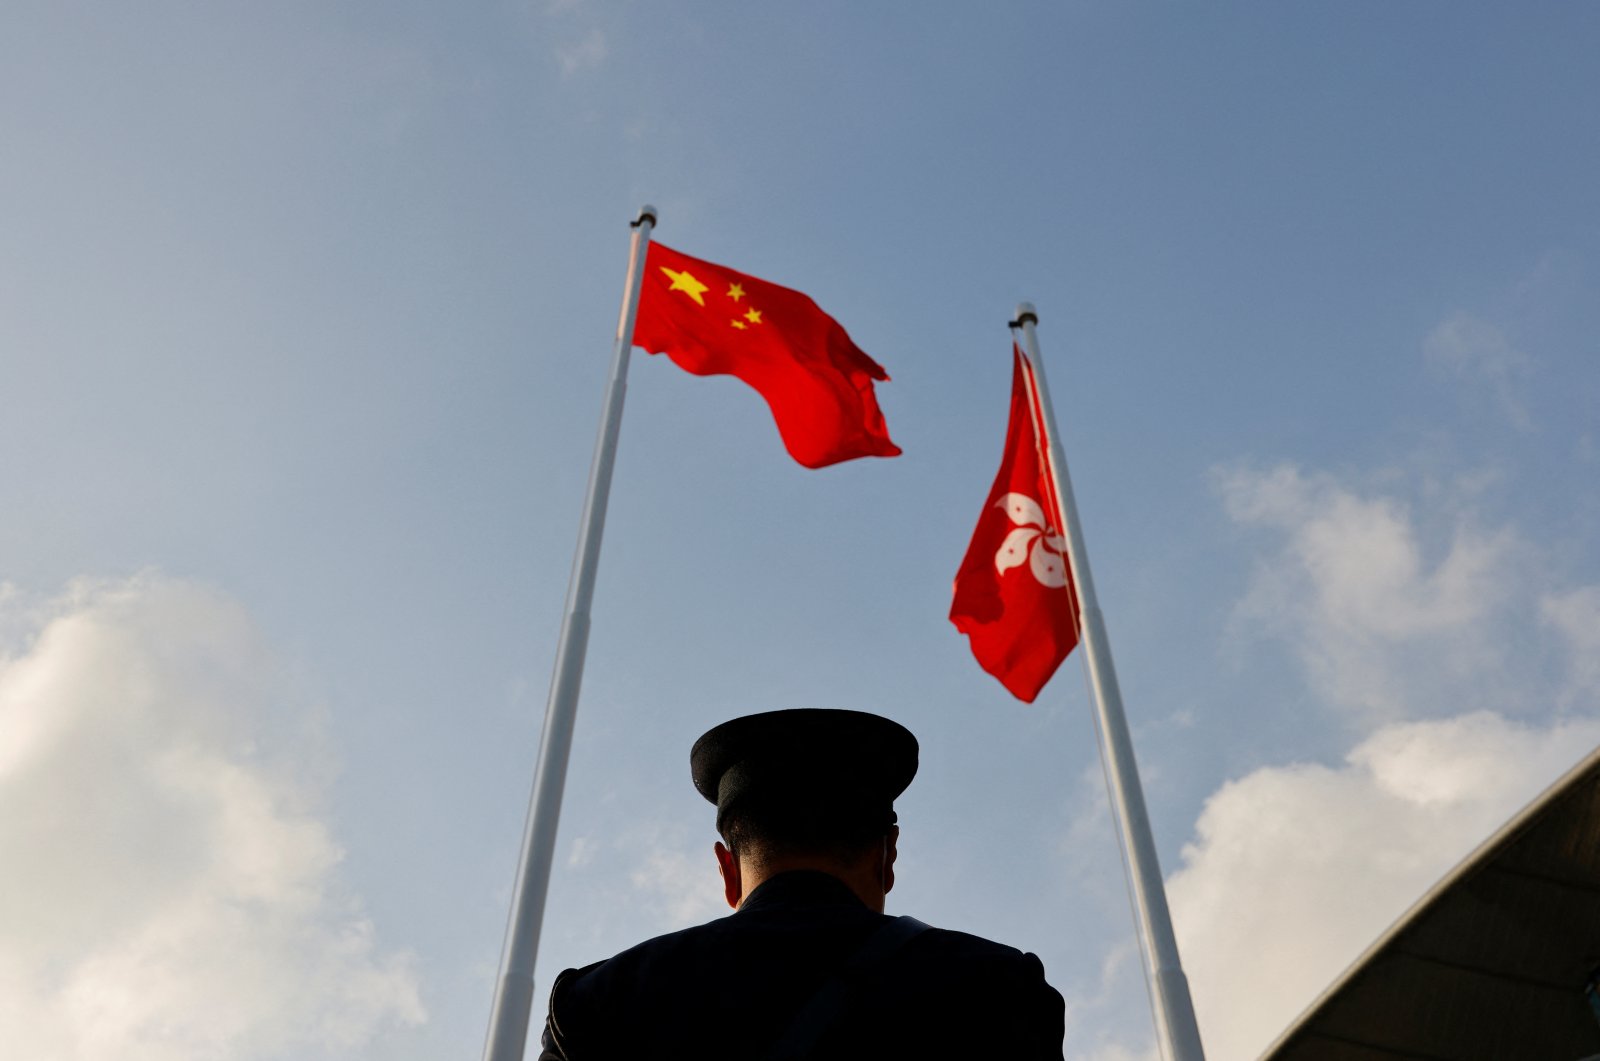 A police officer stands guard below China and Hong Kong flags during a flag raising ceremony, a week ahead of the Legislative Council election in Hong Kong, Dec. 12, 2021. (Reuters Photo)